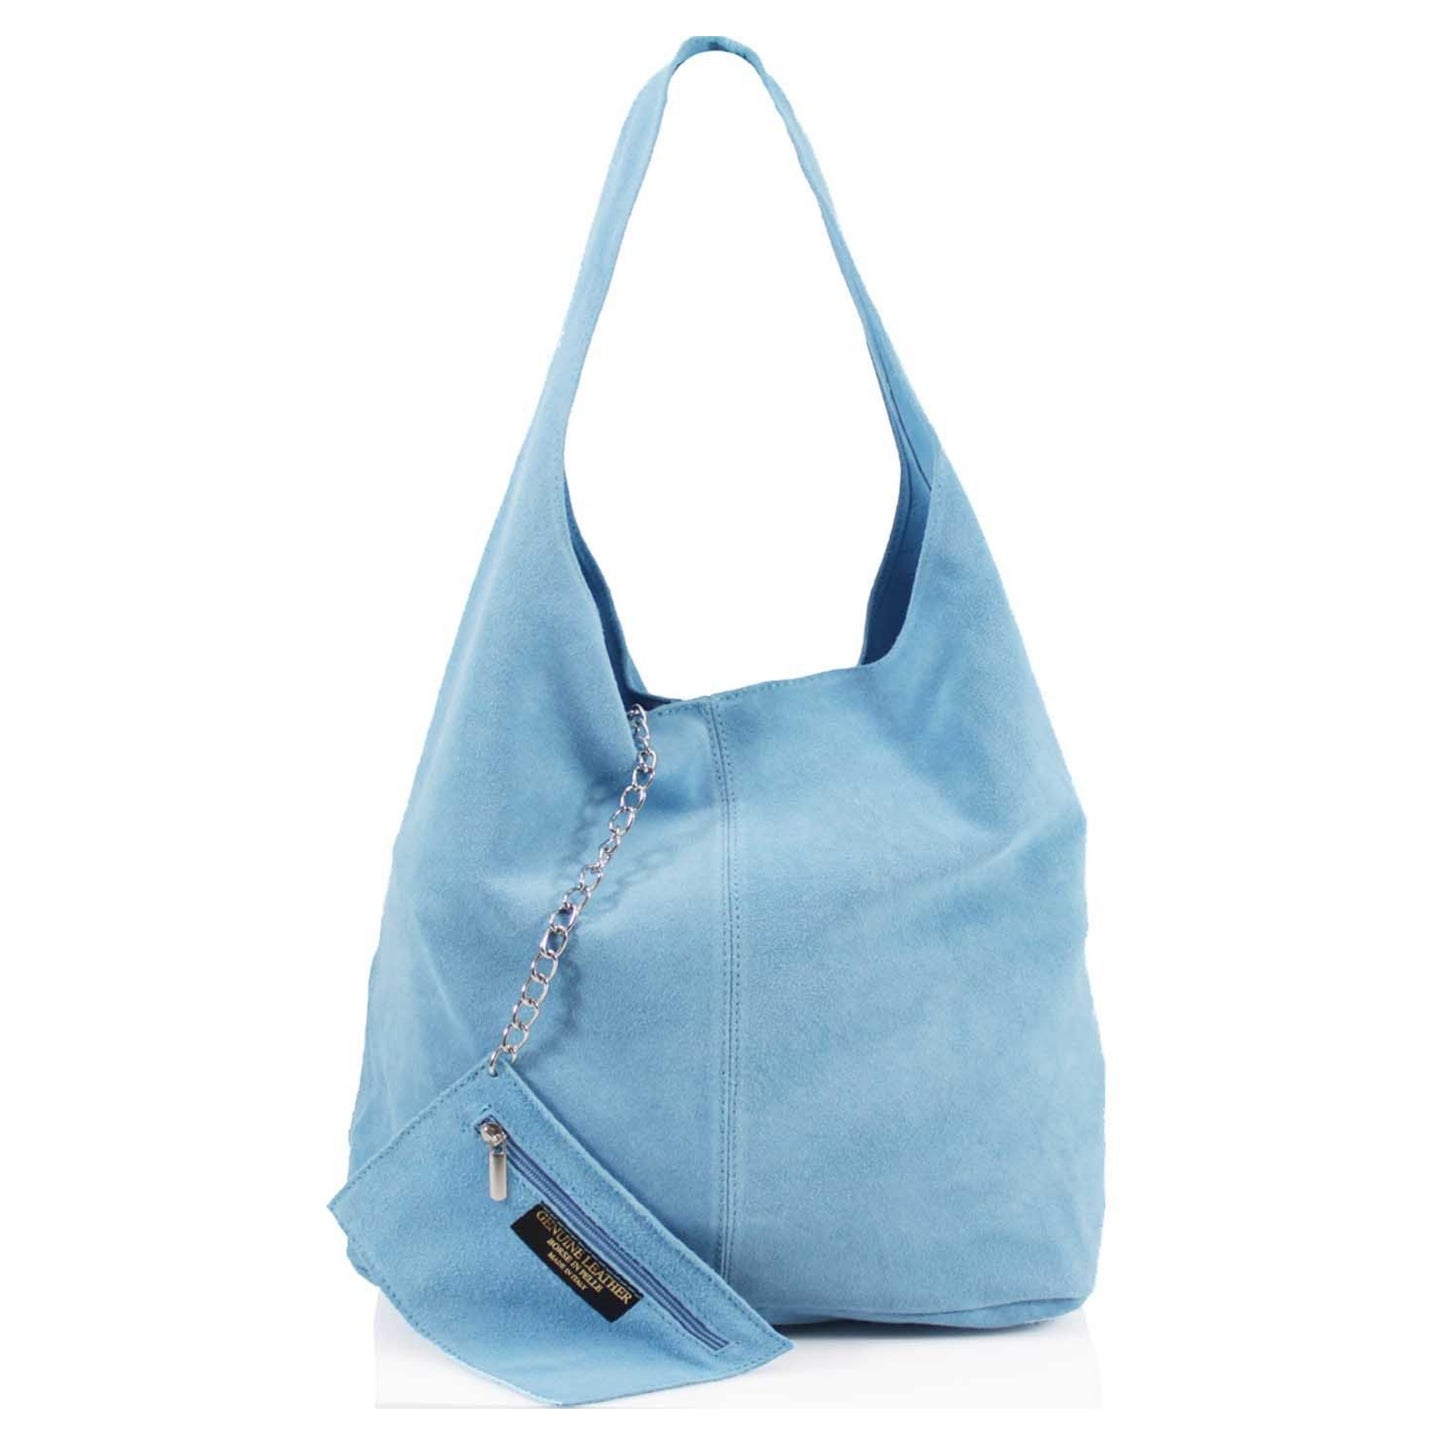 Genuine Suede Dusty Blue Leather Large Hobo Shopper